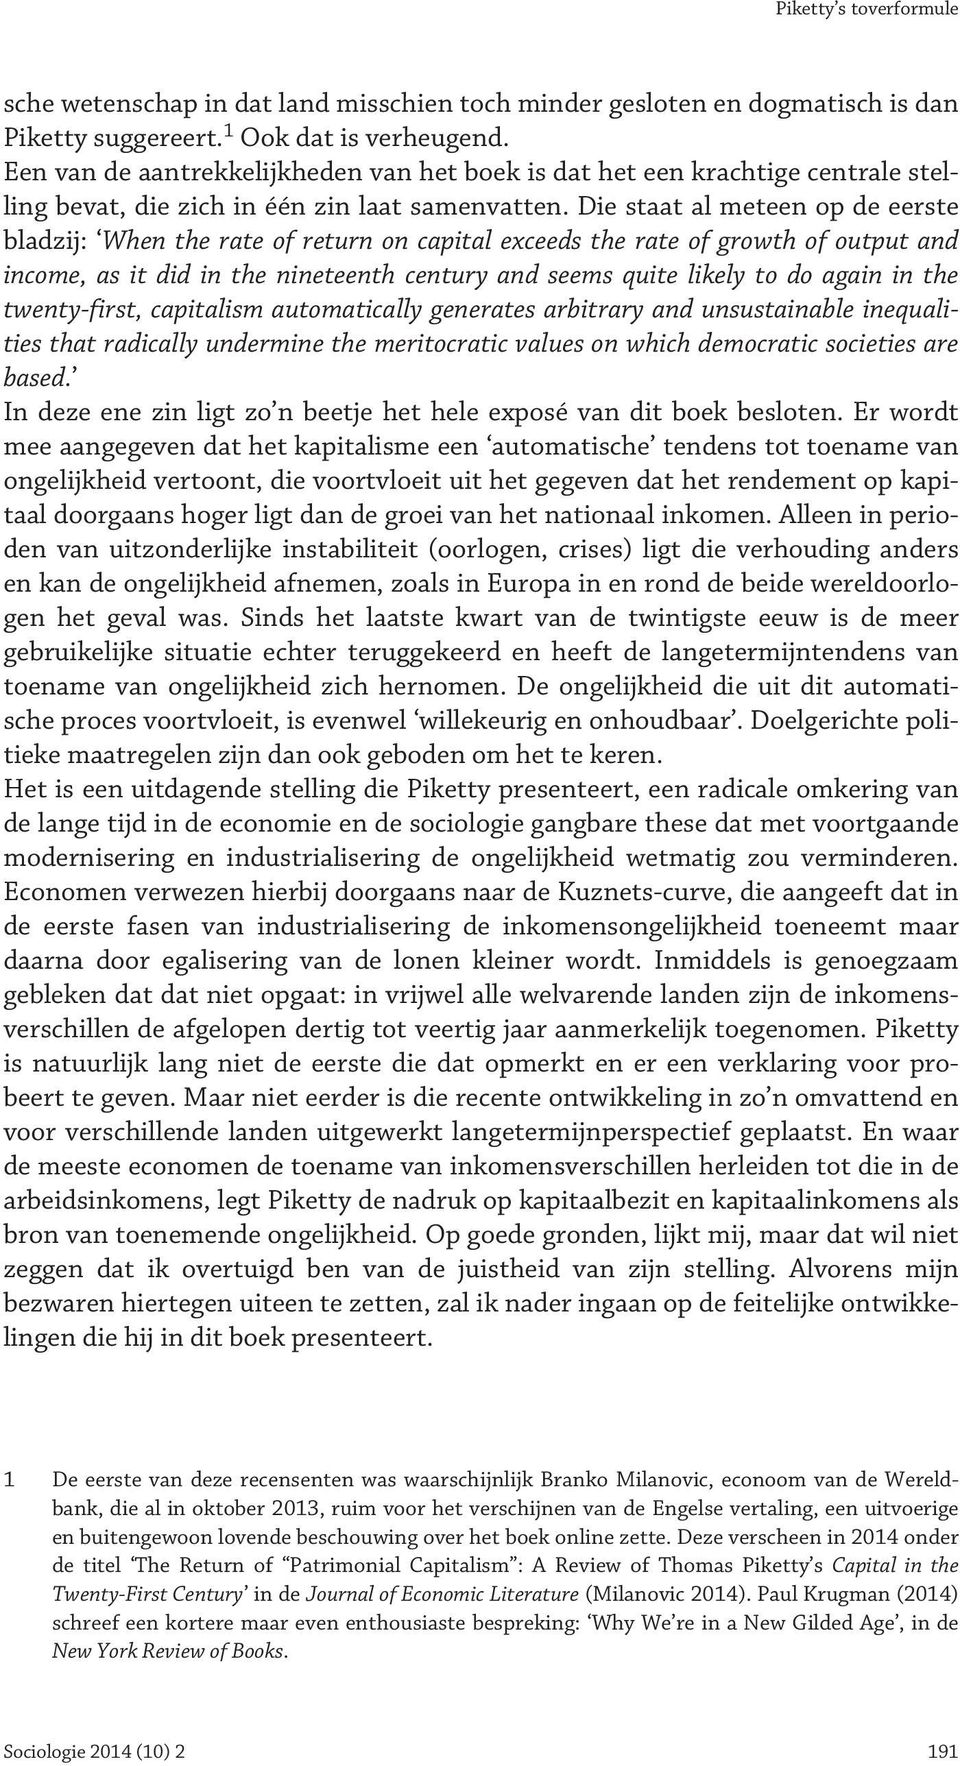 Die staat al meteen op de eerste bladzij: When the rate of return on capital exceeds the rate of growth of output and income, as it did in the nineteenth century and seems quite likely to do again in